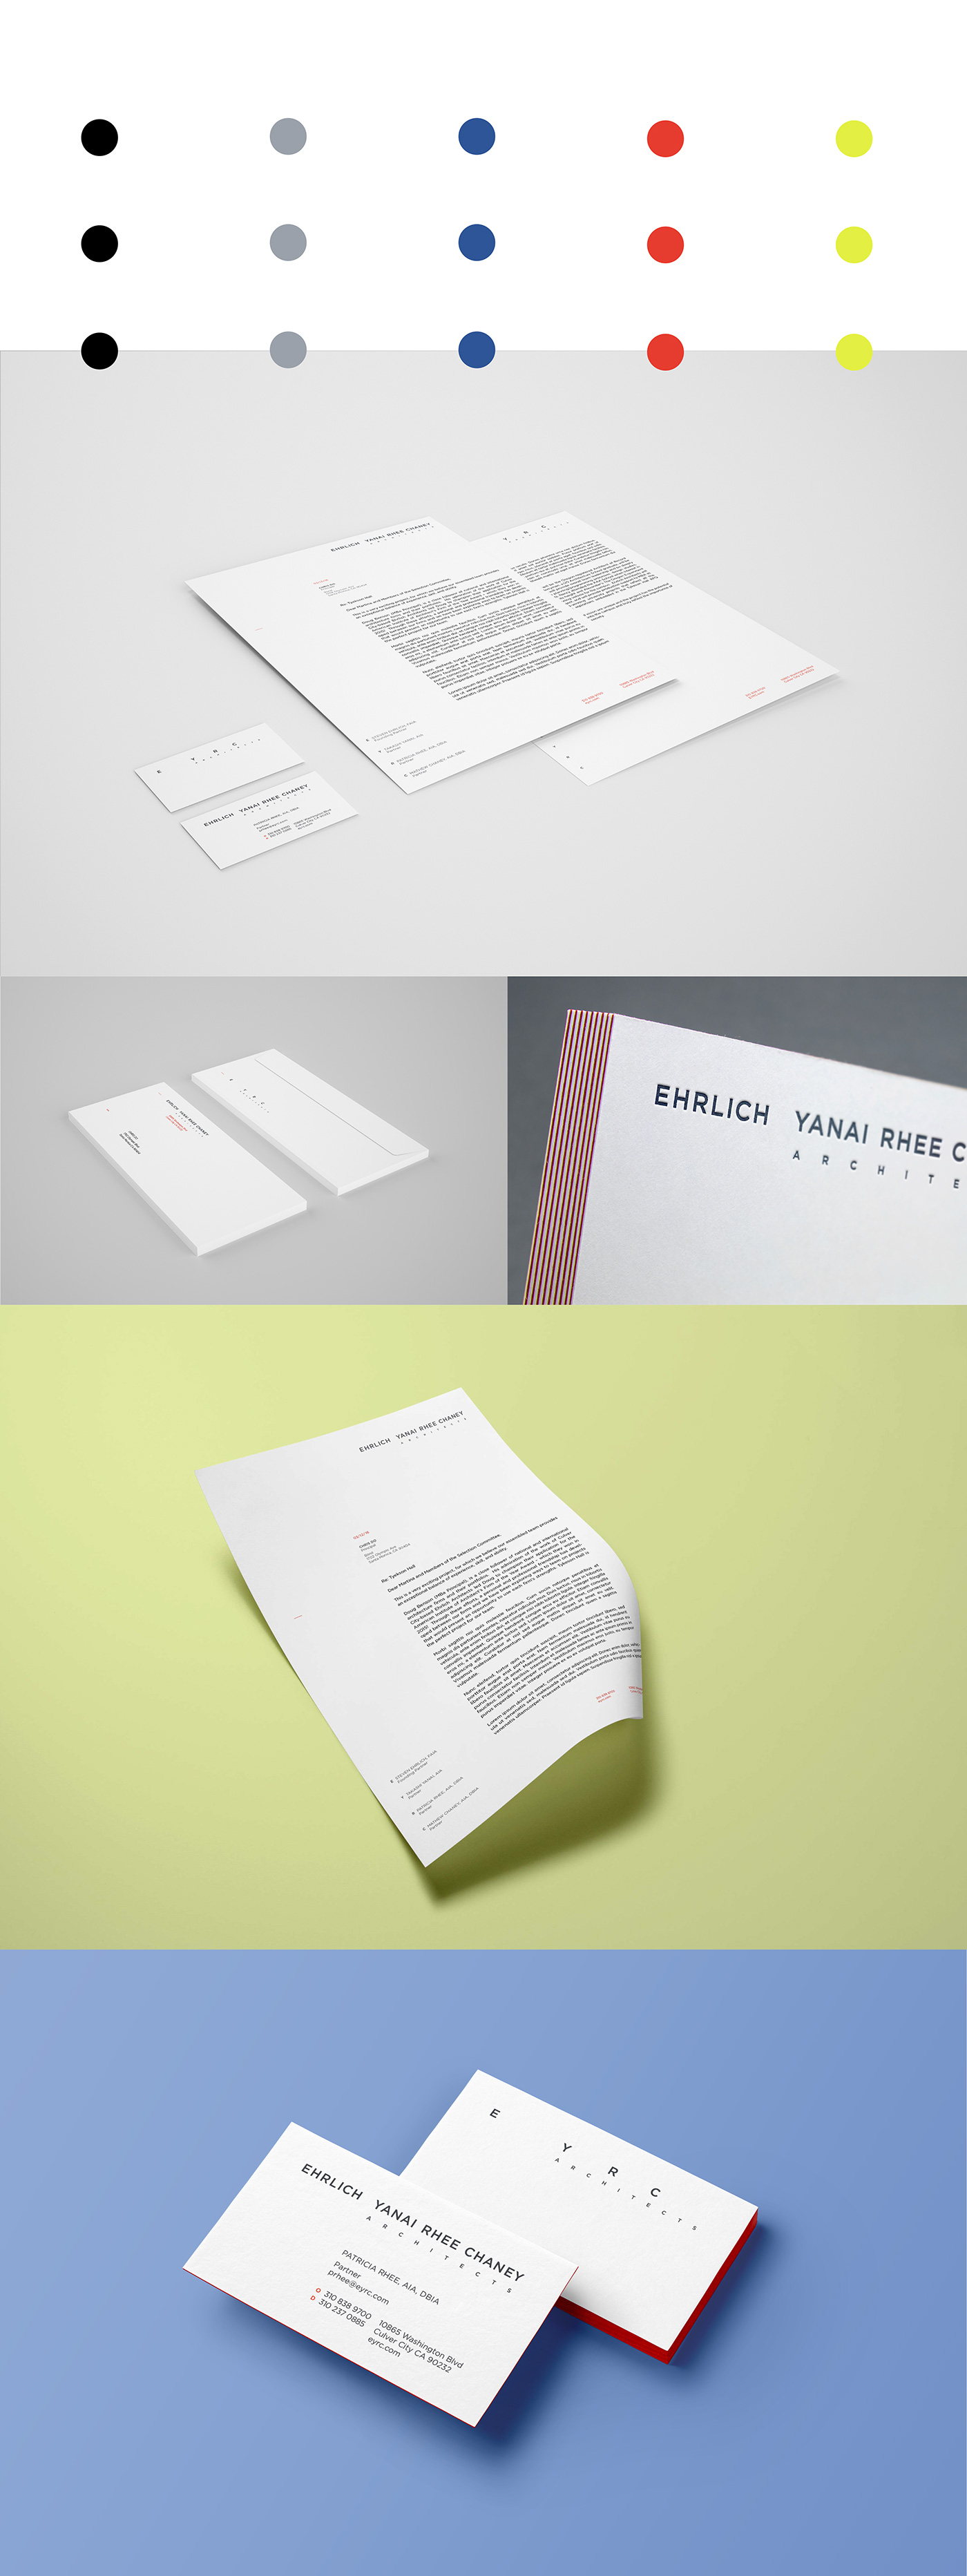 Identity Design Identity System branding  print Collateral architecture business card letterhead logo interactive